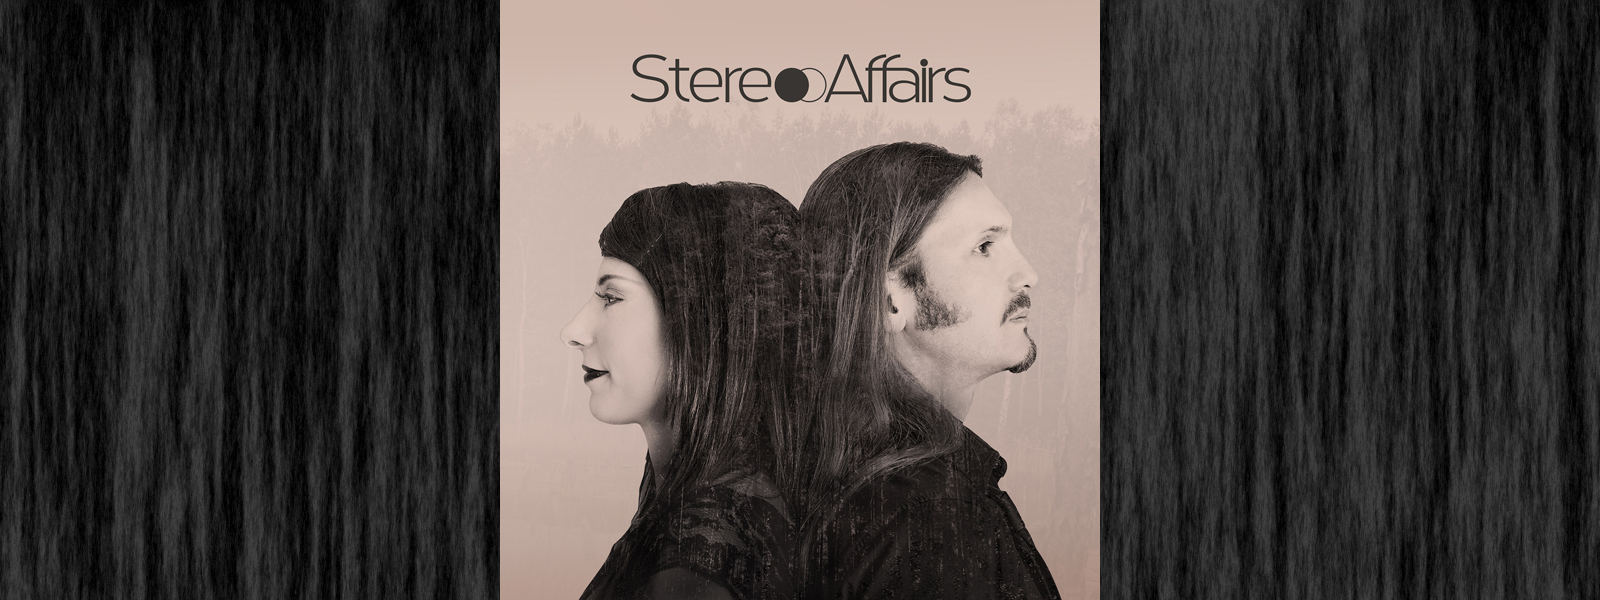 Stereo Affairs